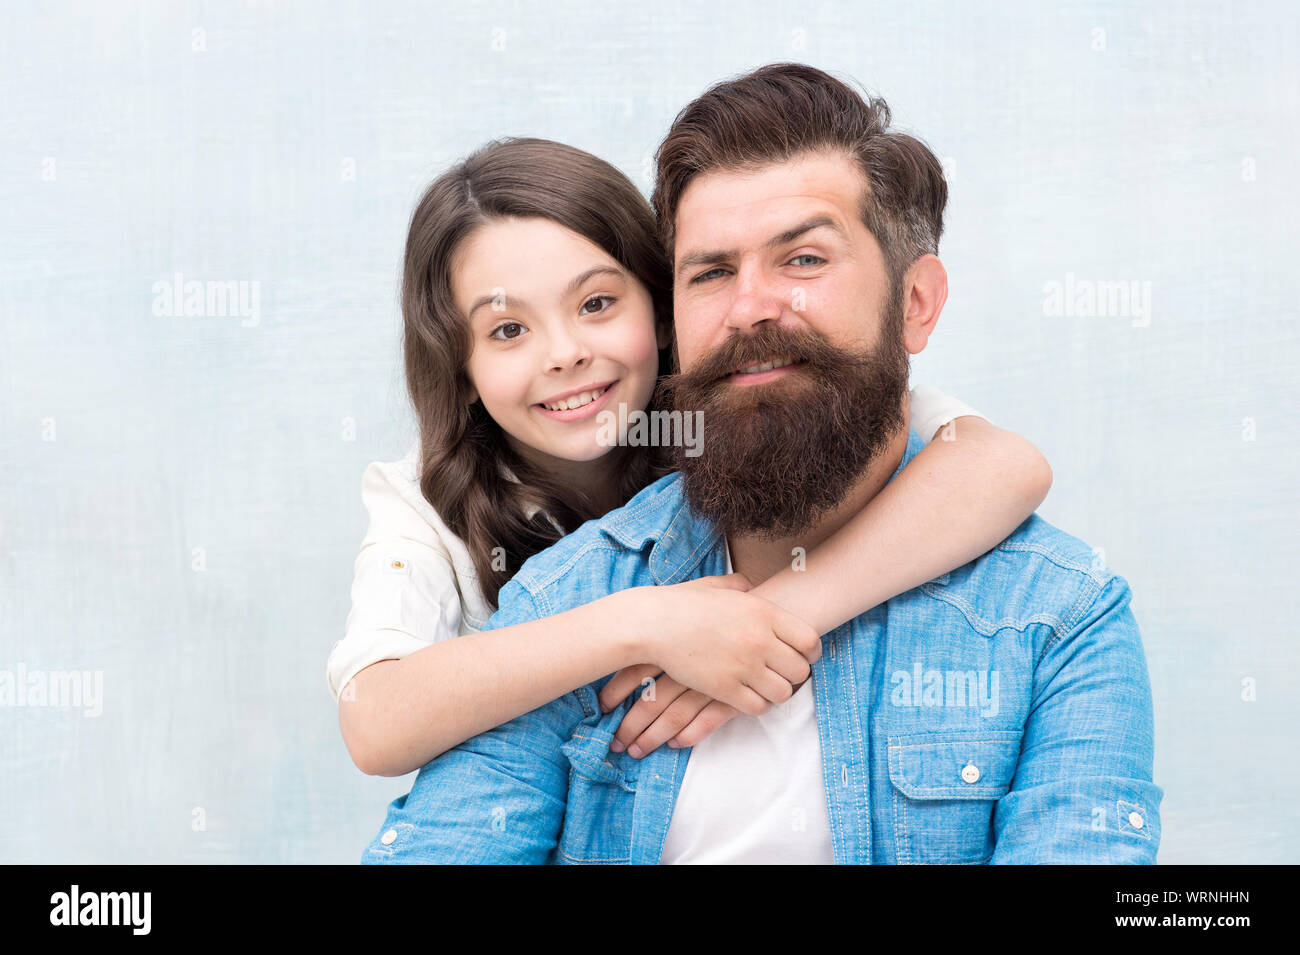 Family hug. Strengthening father daughter relationships. Child and ...